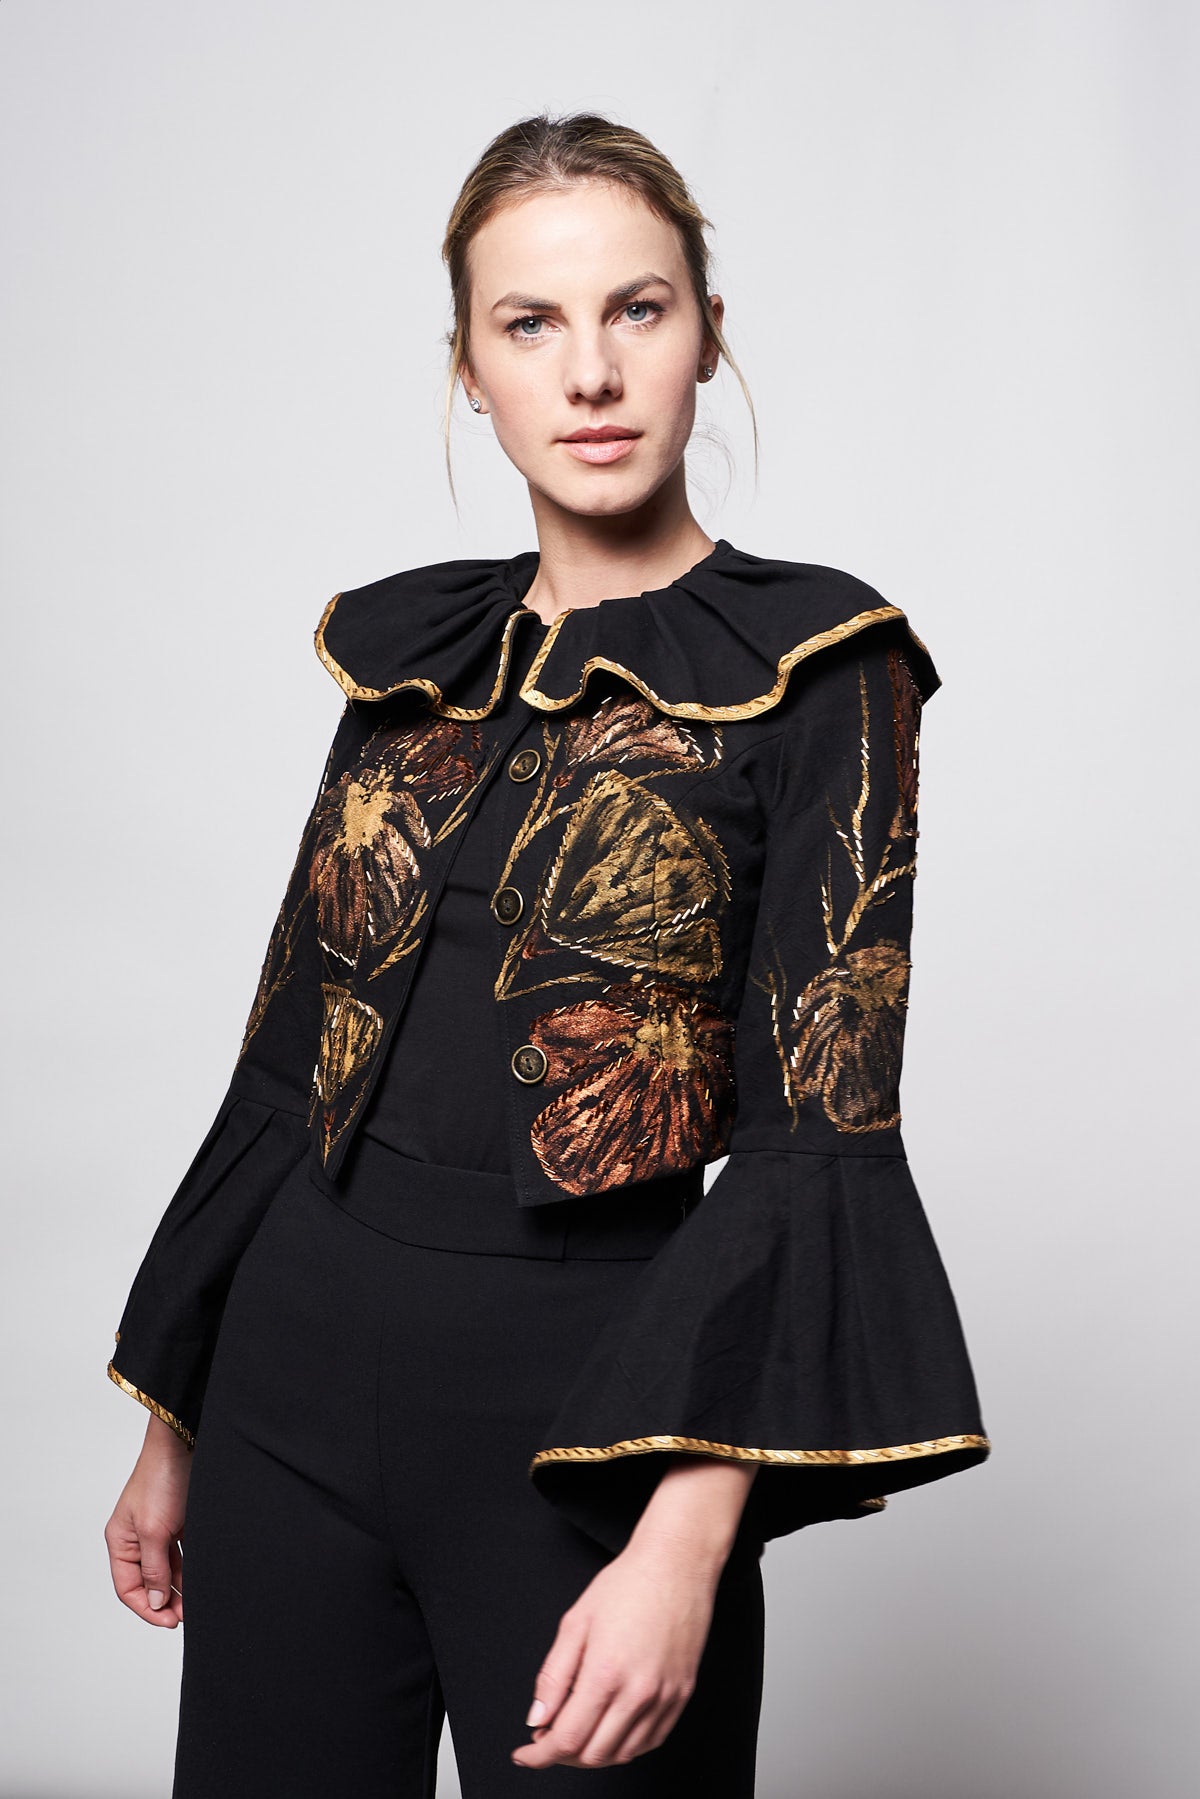 CROPPED PLEATED JACKET, HAND-PAINTED AND HAND-EMBROIDERED - MEDUSAS